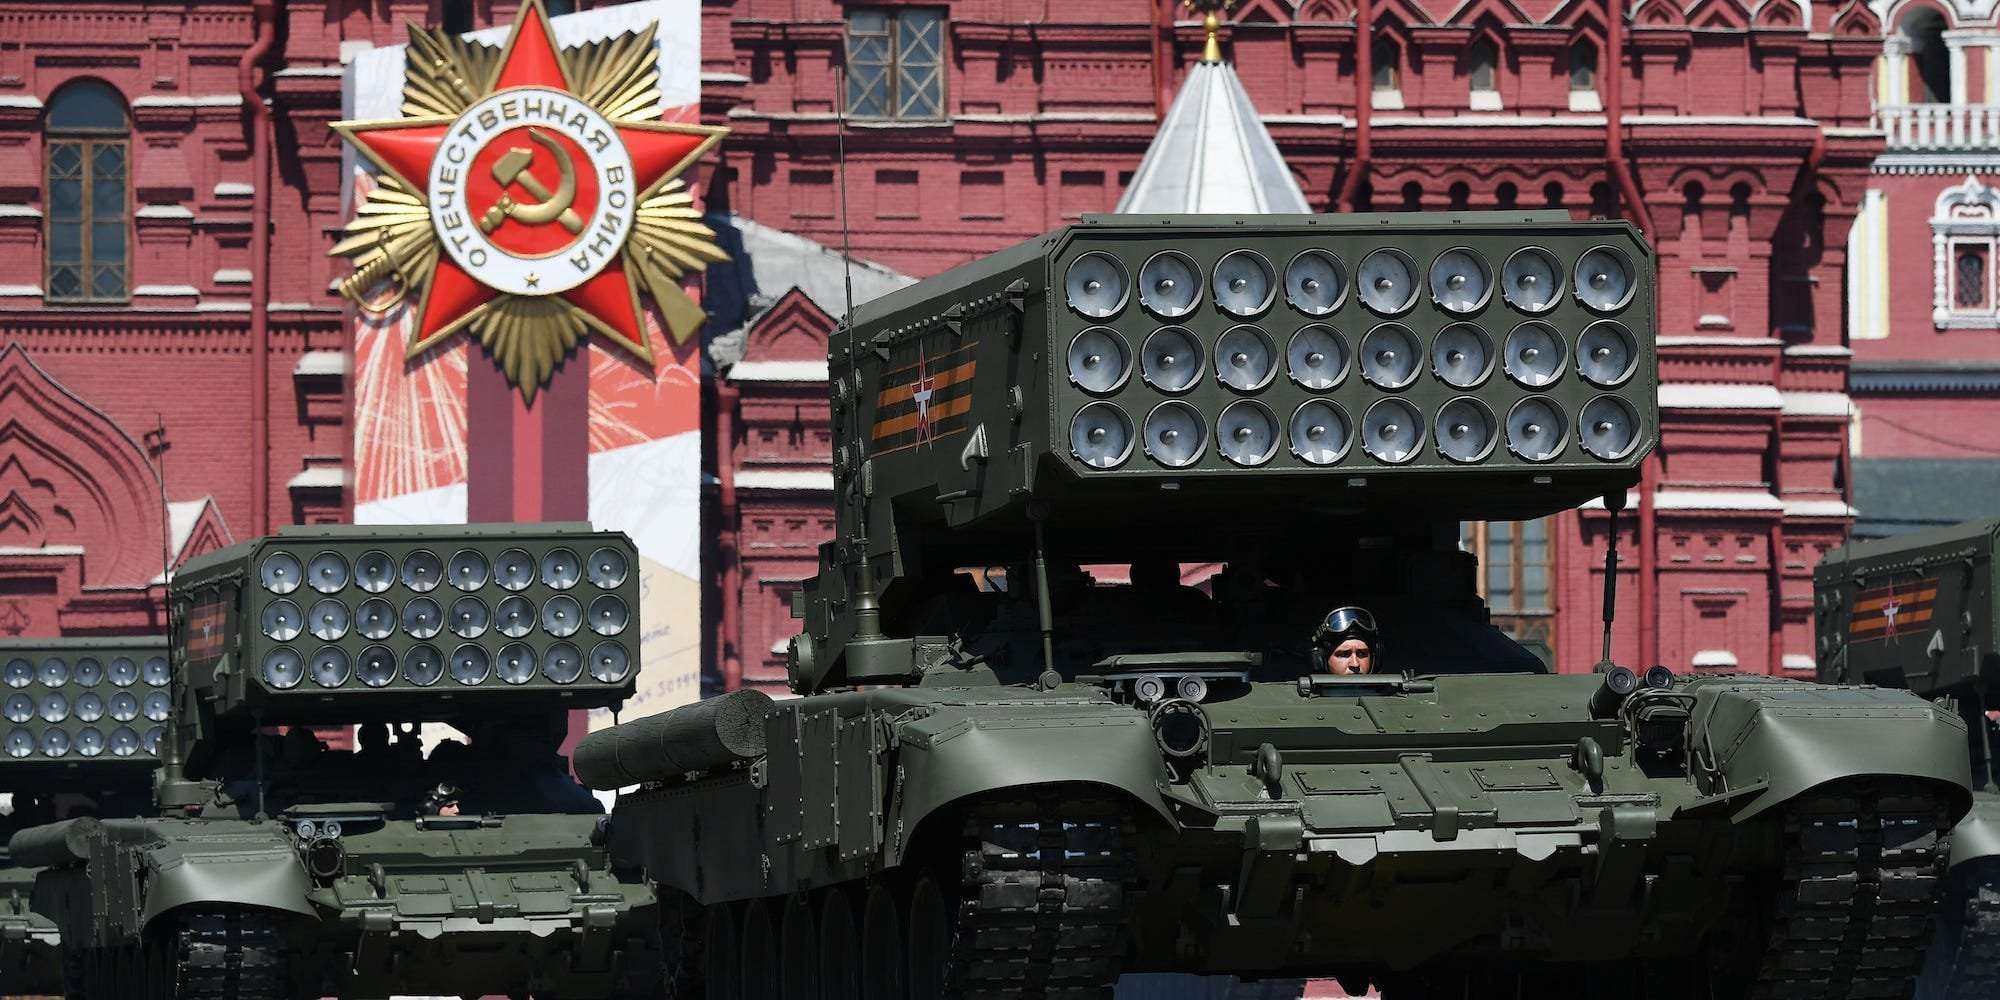 image for Russia deployed its feared thermobaric missile launcher on its own territory to repel an attack by insurgents, UK intel says